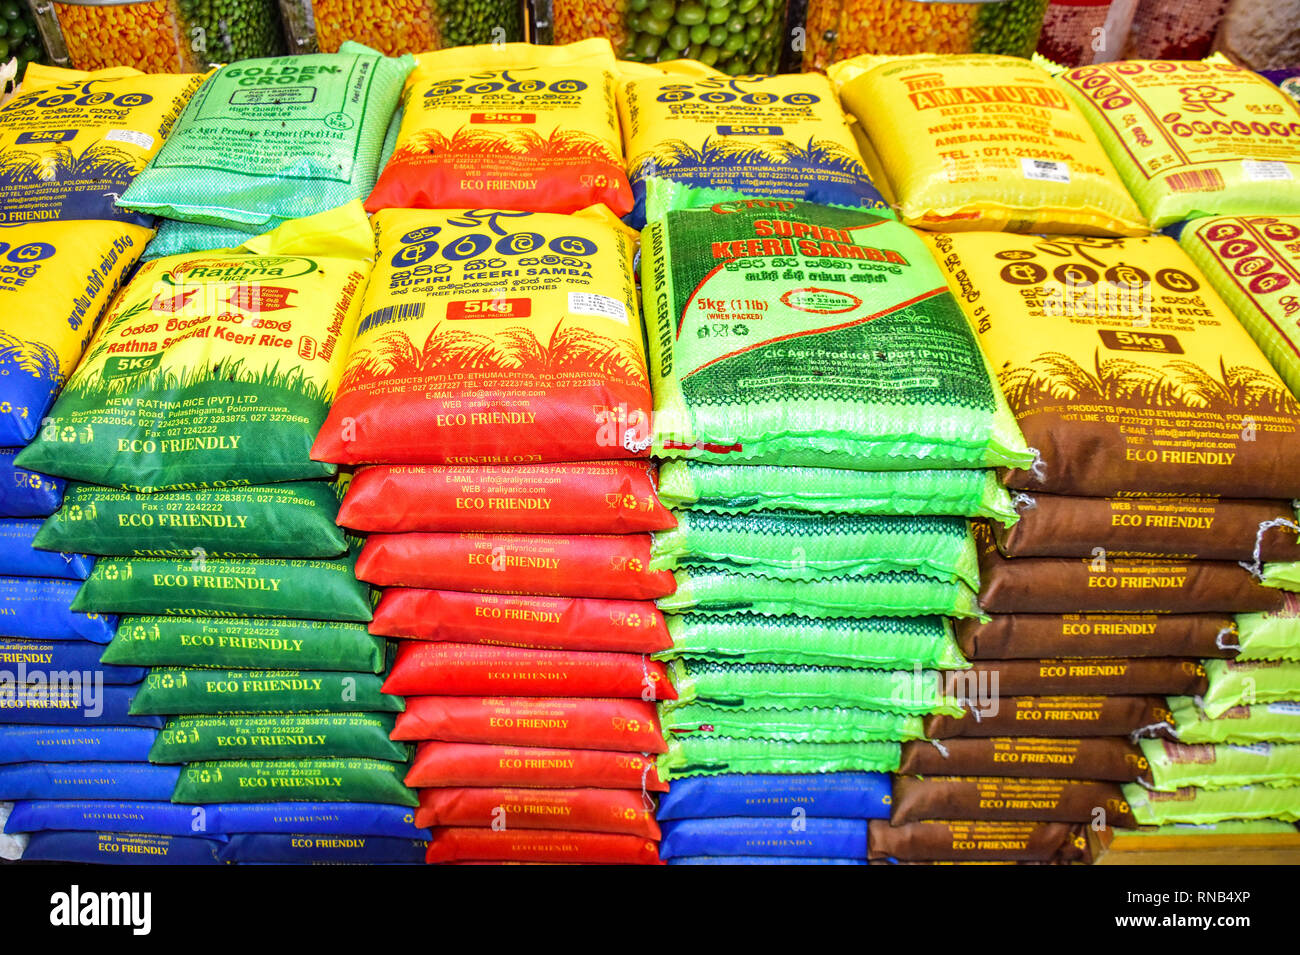 TN traders solution to avoid GST on 25 kgs of rice Sell it in 26 kg sacks   The News Minute